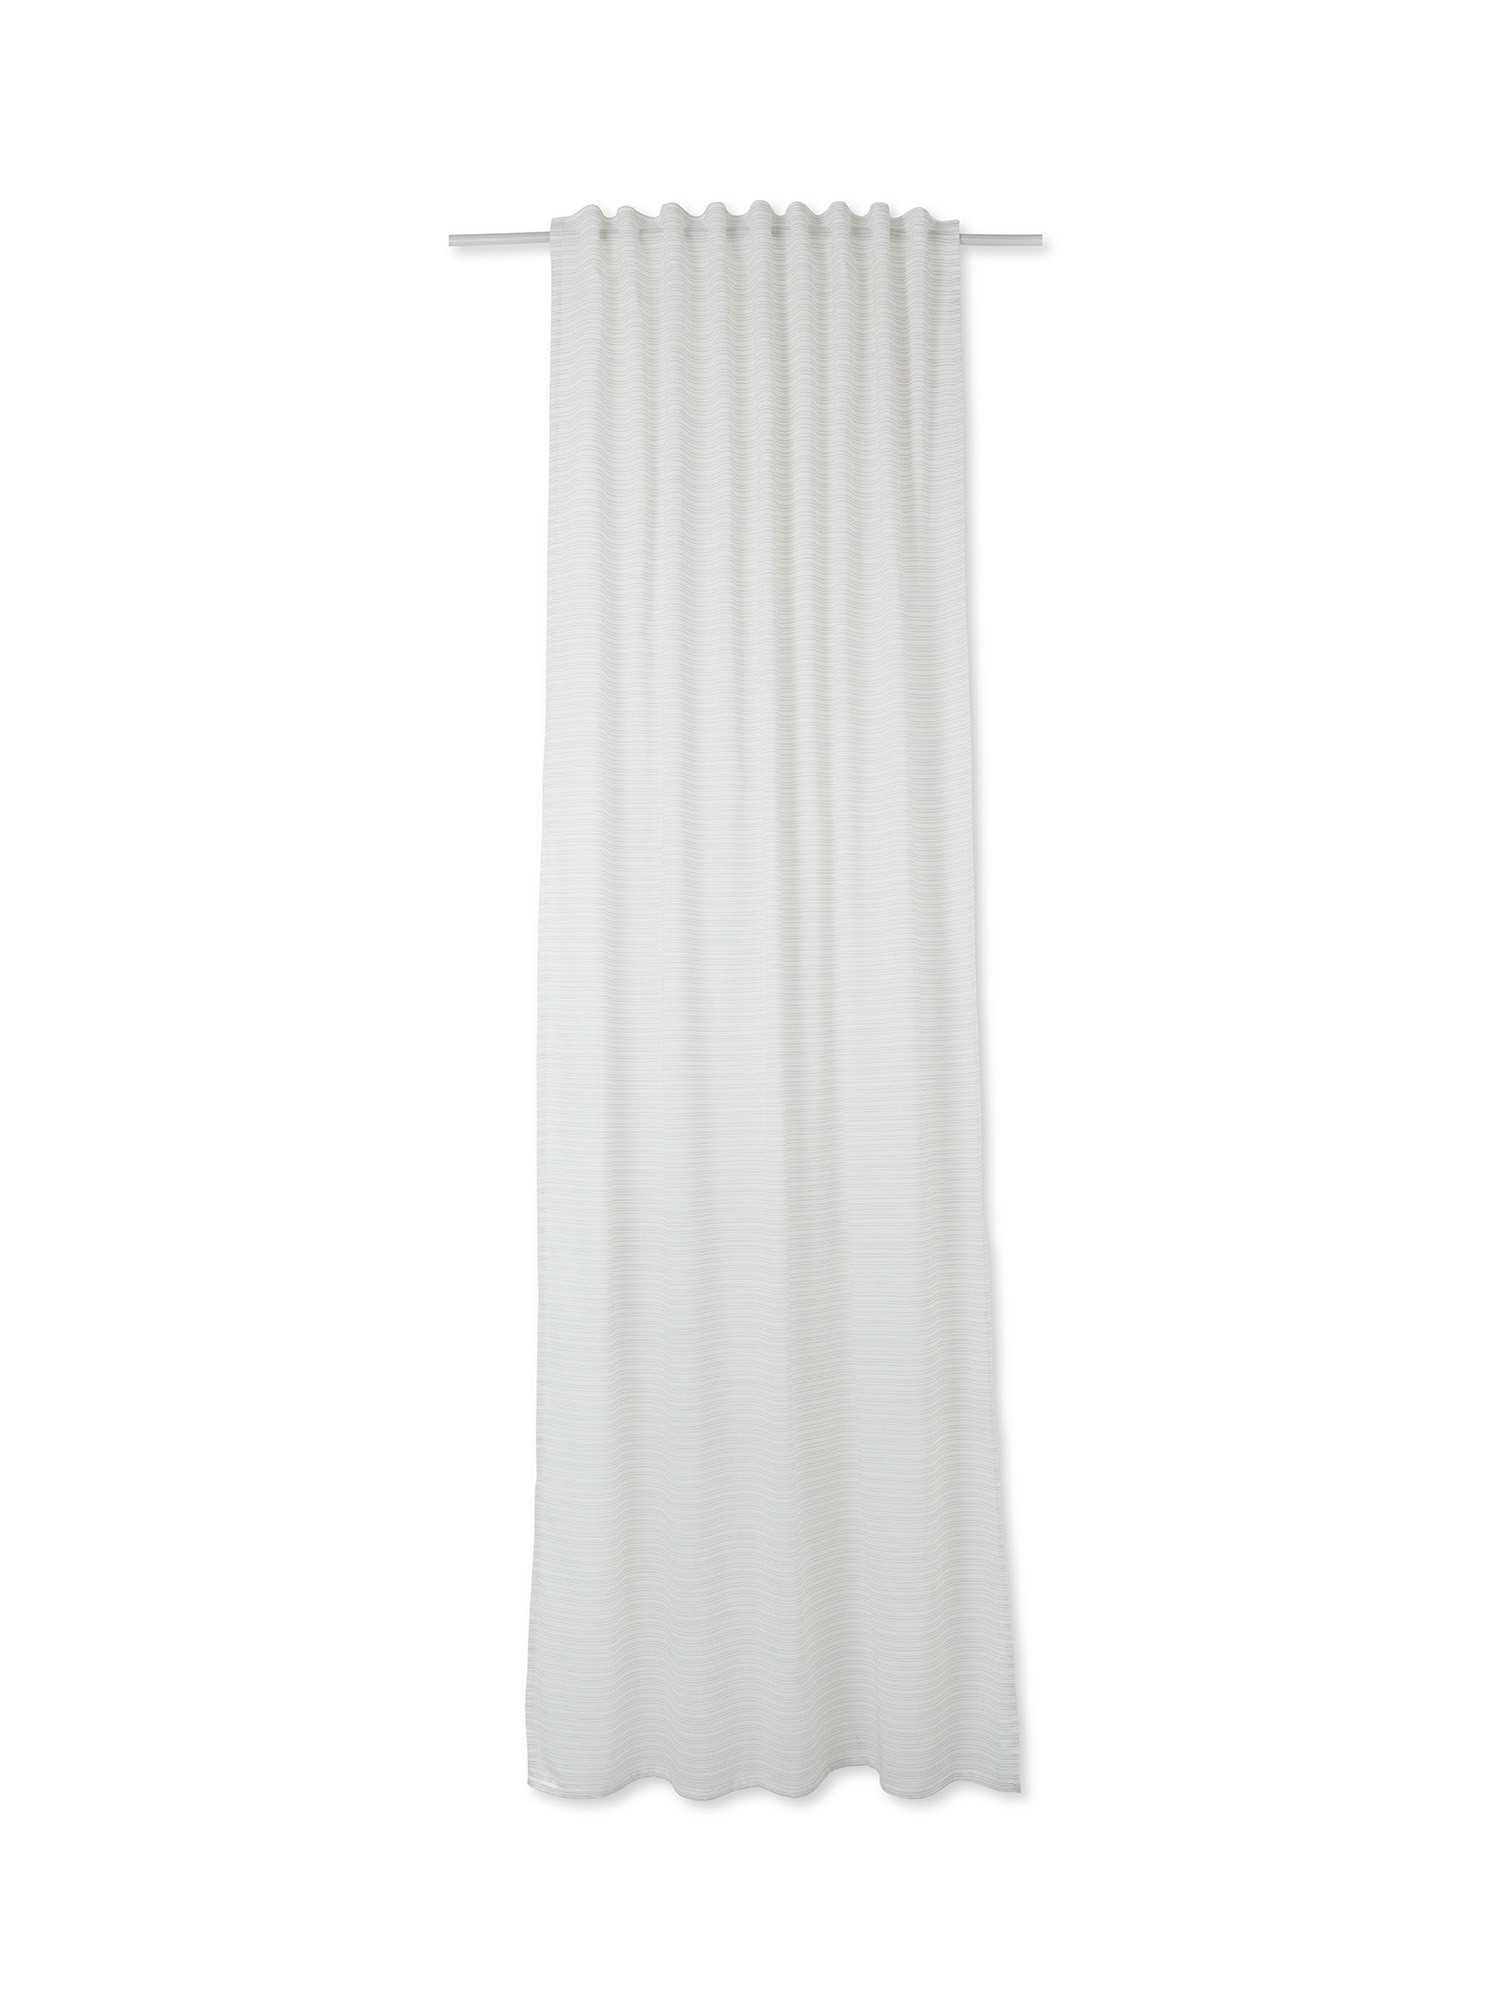 Curtain with raised stitching, White, large image number 0